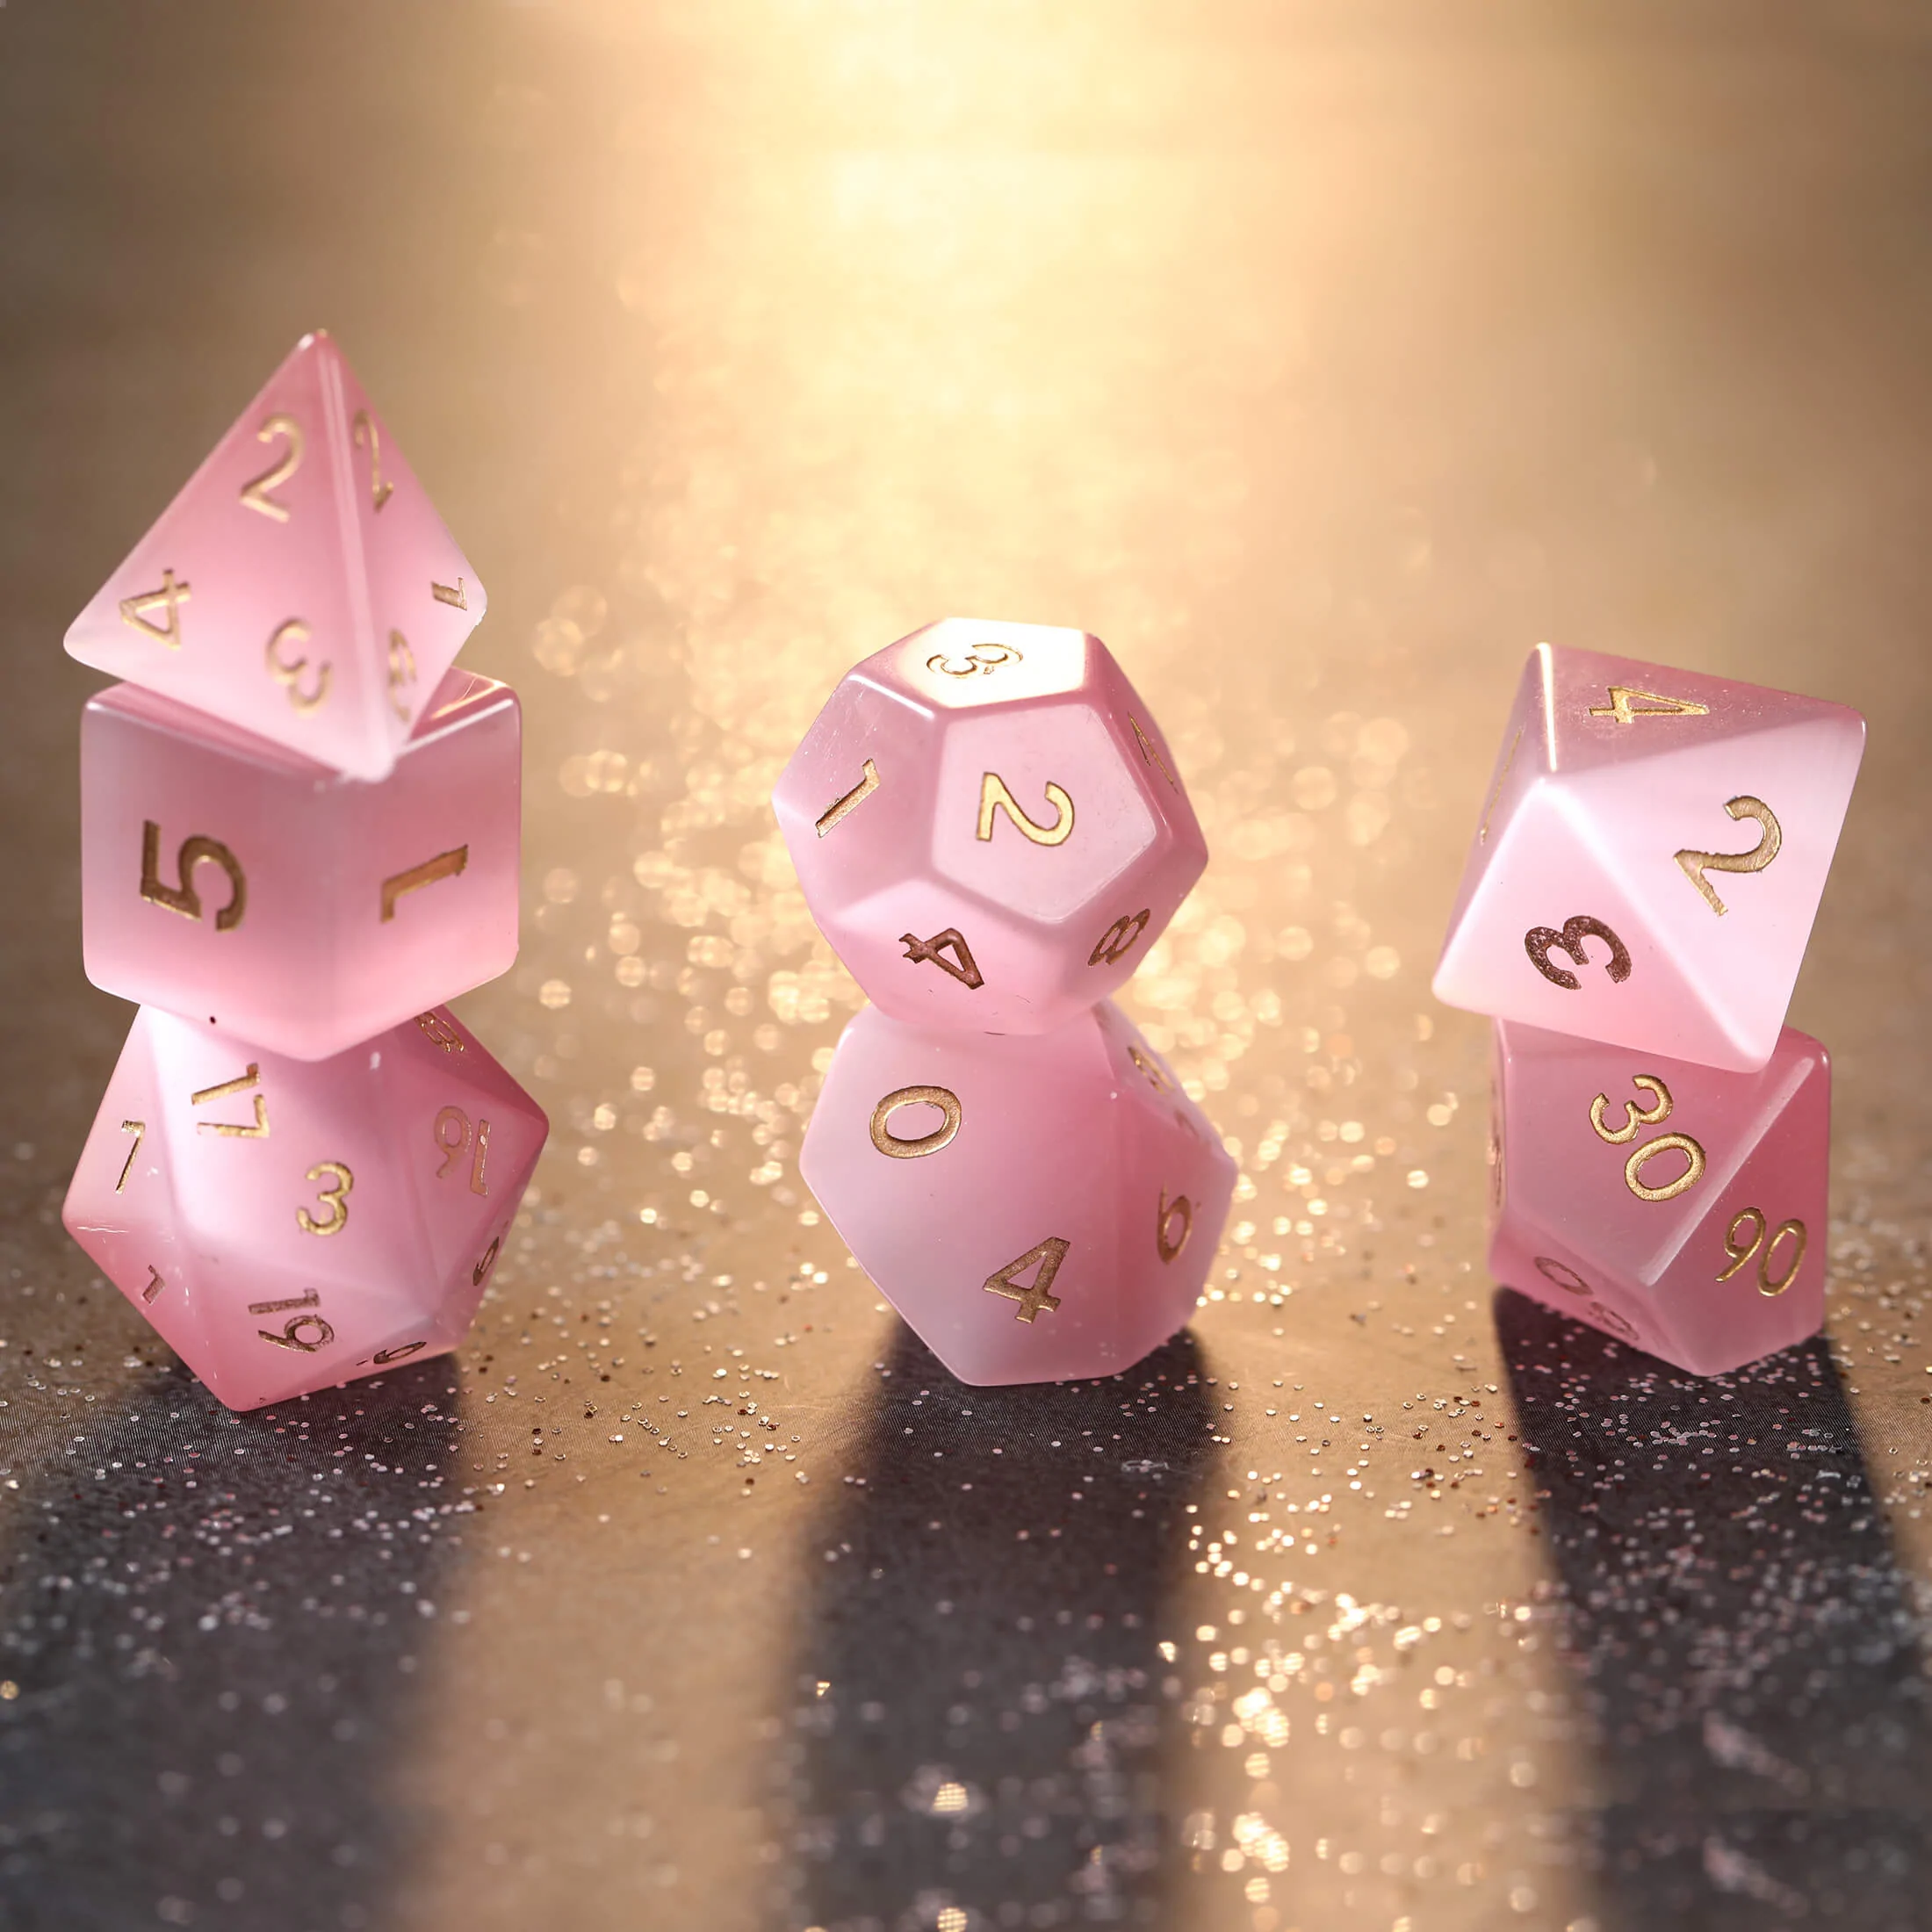 A photo of a set of seven pink dice with gold numbers on the faces. 